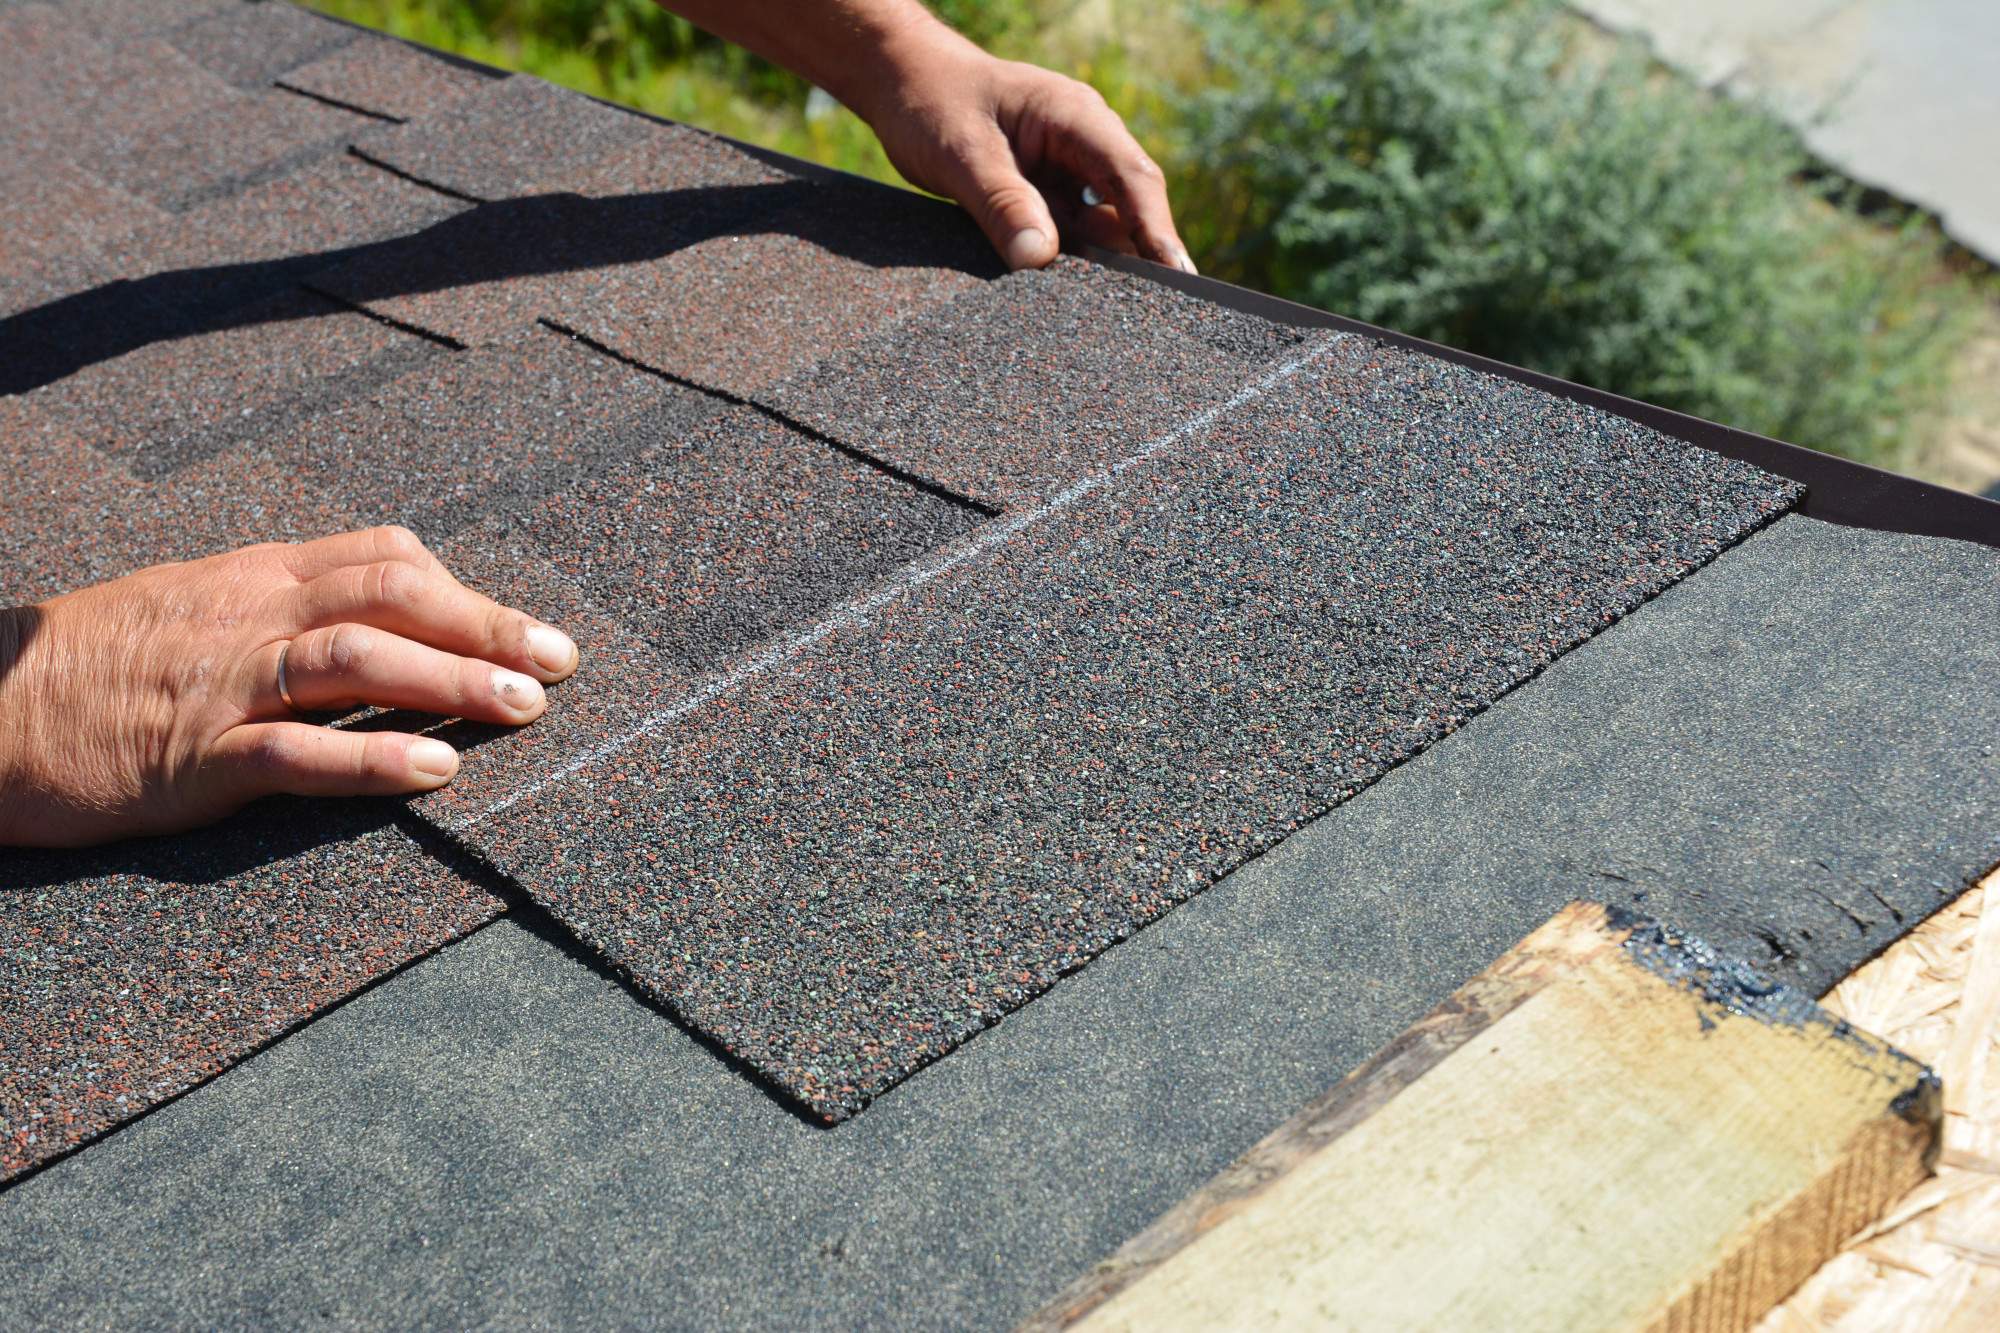 Slate Roof vs Shingle Roof: What Are the Differences?